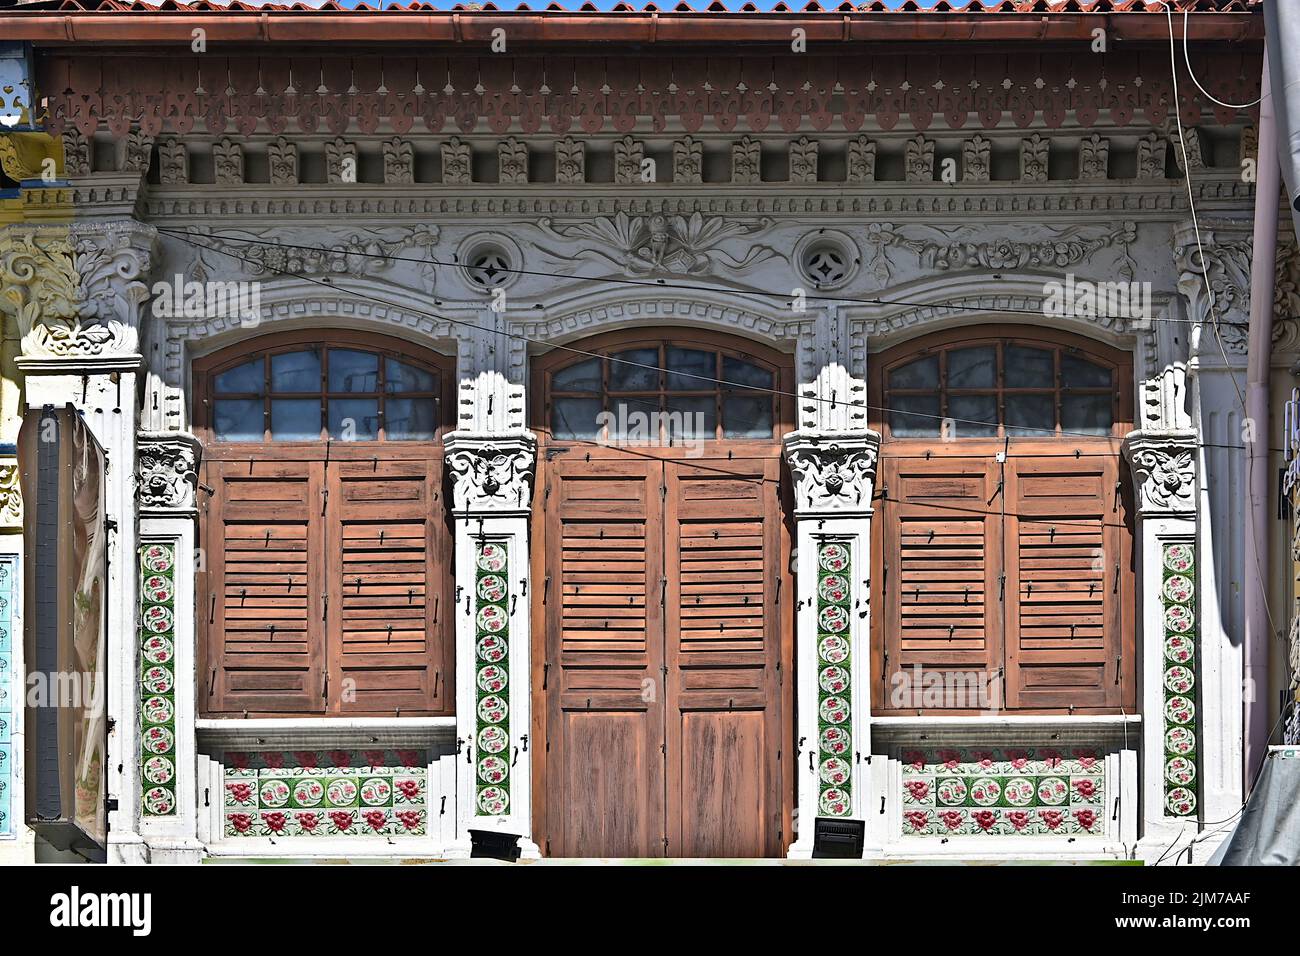 Straits Chinese Peranakan shophouse with brown louvered shutters, ornate columns & decorative plaster motifs Stock Photo